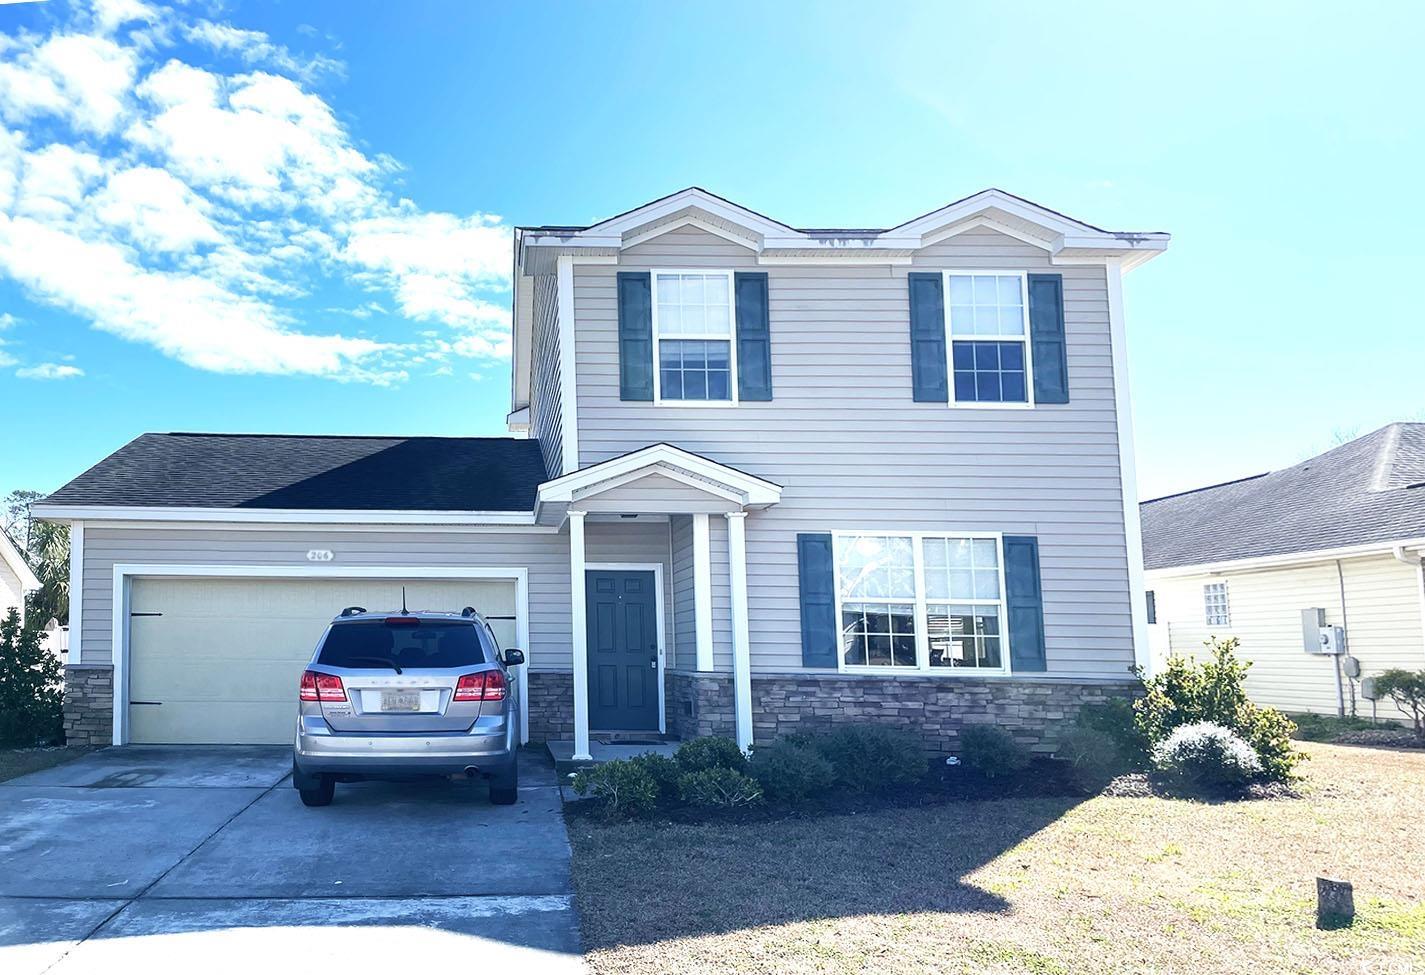 this 3 bedroom 2.5 bath home, located right off hwy 707 by the murrells inlet/socastee interchange to hwy 31 (carolina bays parkway), features a large fenced-in back yard and the oversized garage allows more room to set up a work space or even fit a motorcycle with two cars. the property is located a short drive to the beach, a plethora of golf courses and is in the award-winning st. james school district. the seller is offering a two thousand five hundred dollar flooring credit for second floor carpet/flooring!